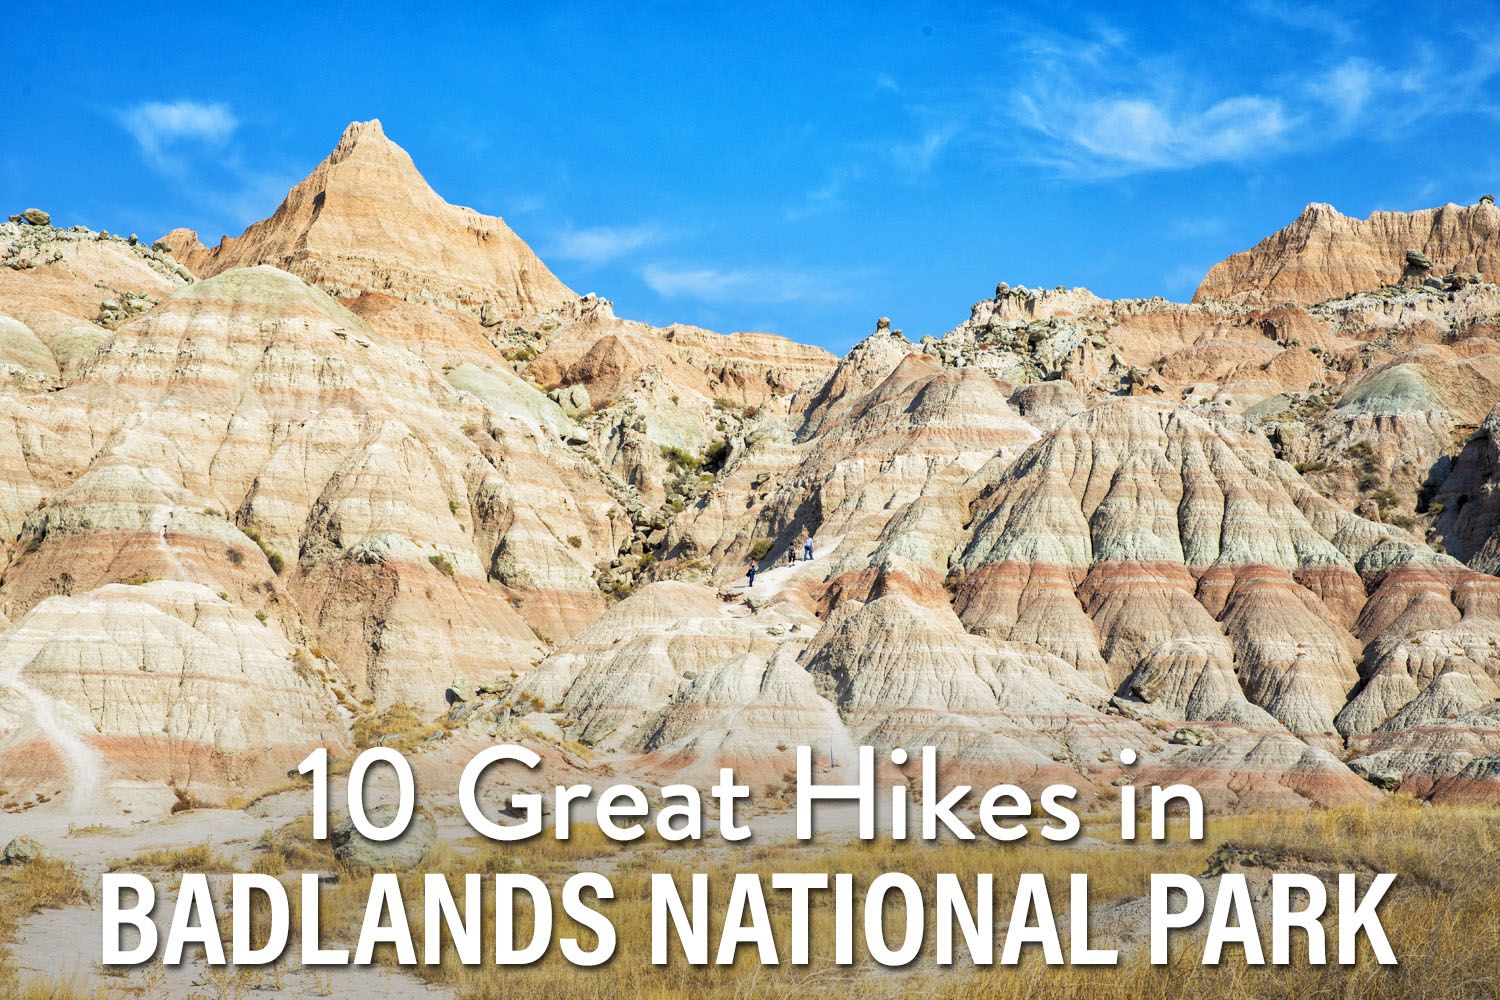 Hikes in the Badlands